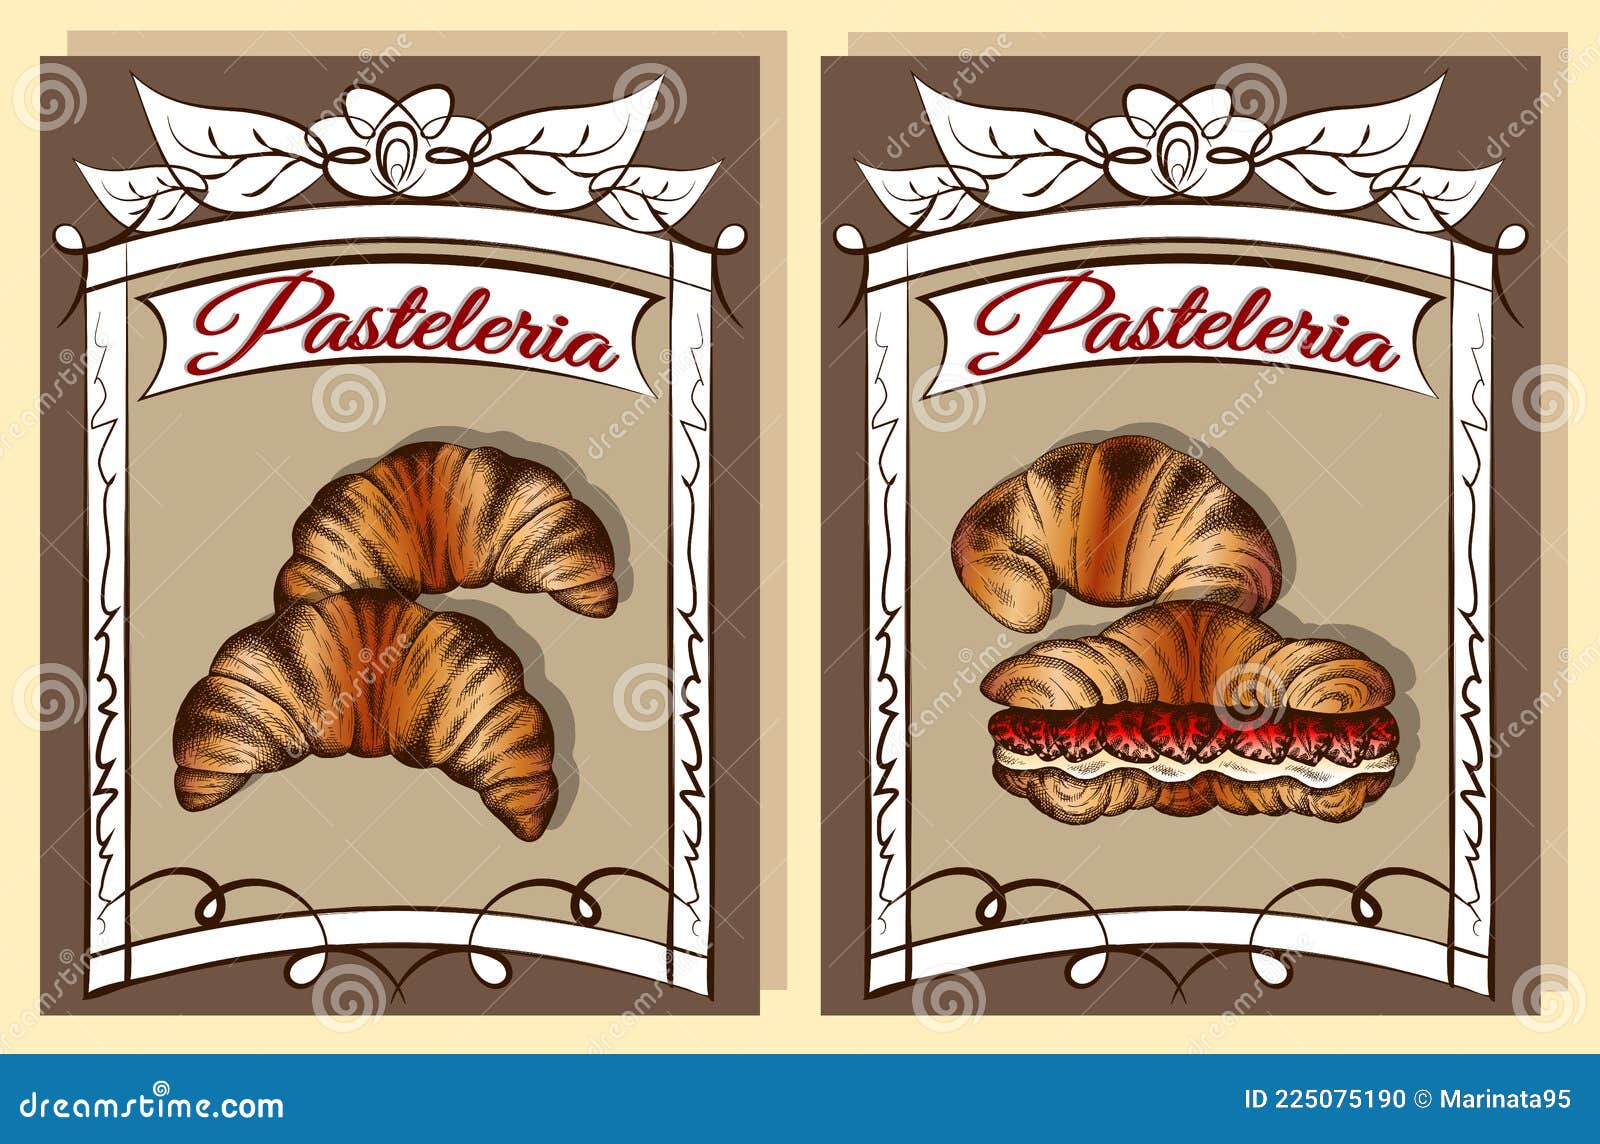   of sketch hand drawn poster with croissants. vintage bakery background. croissant with strawberry.